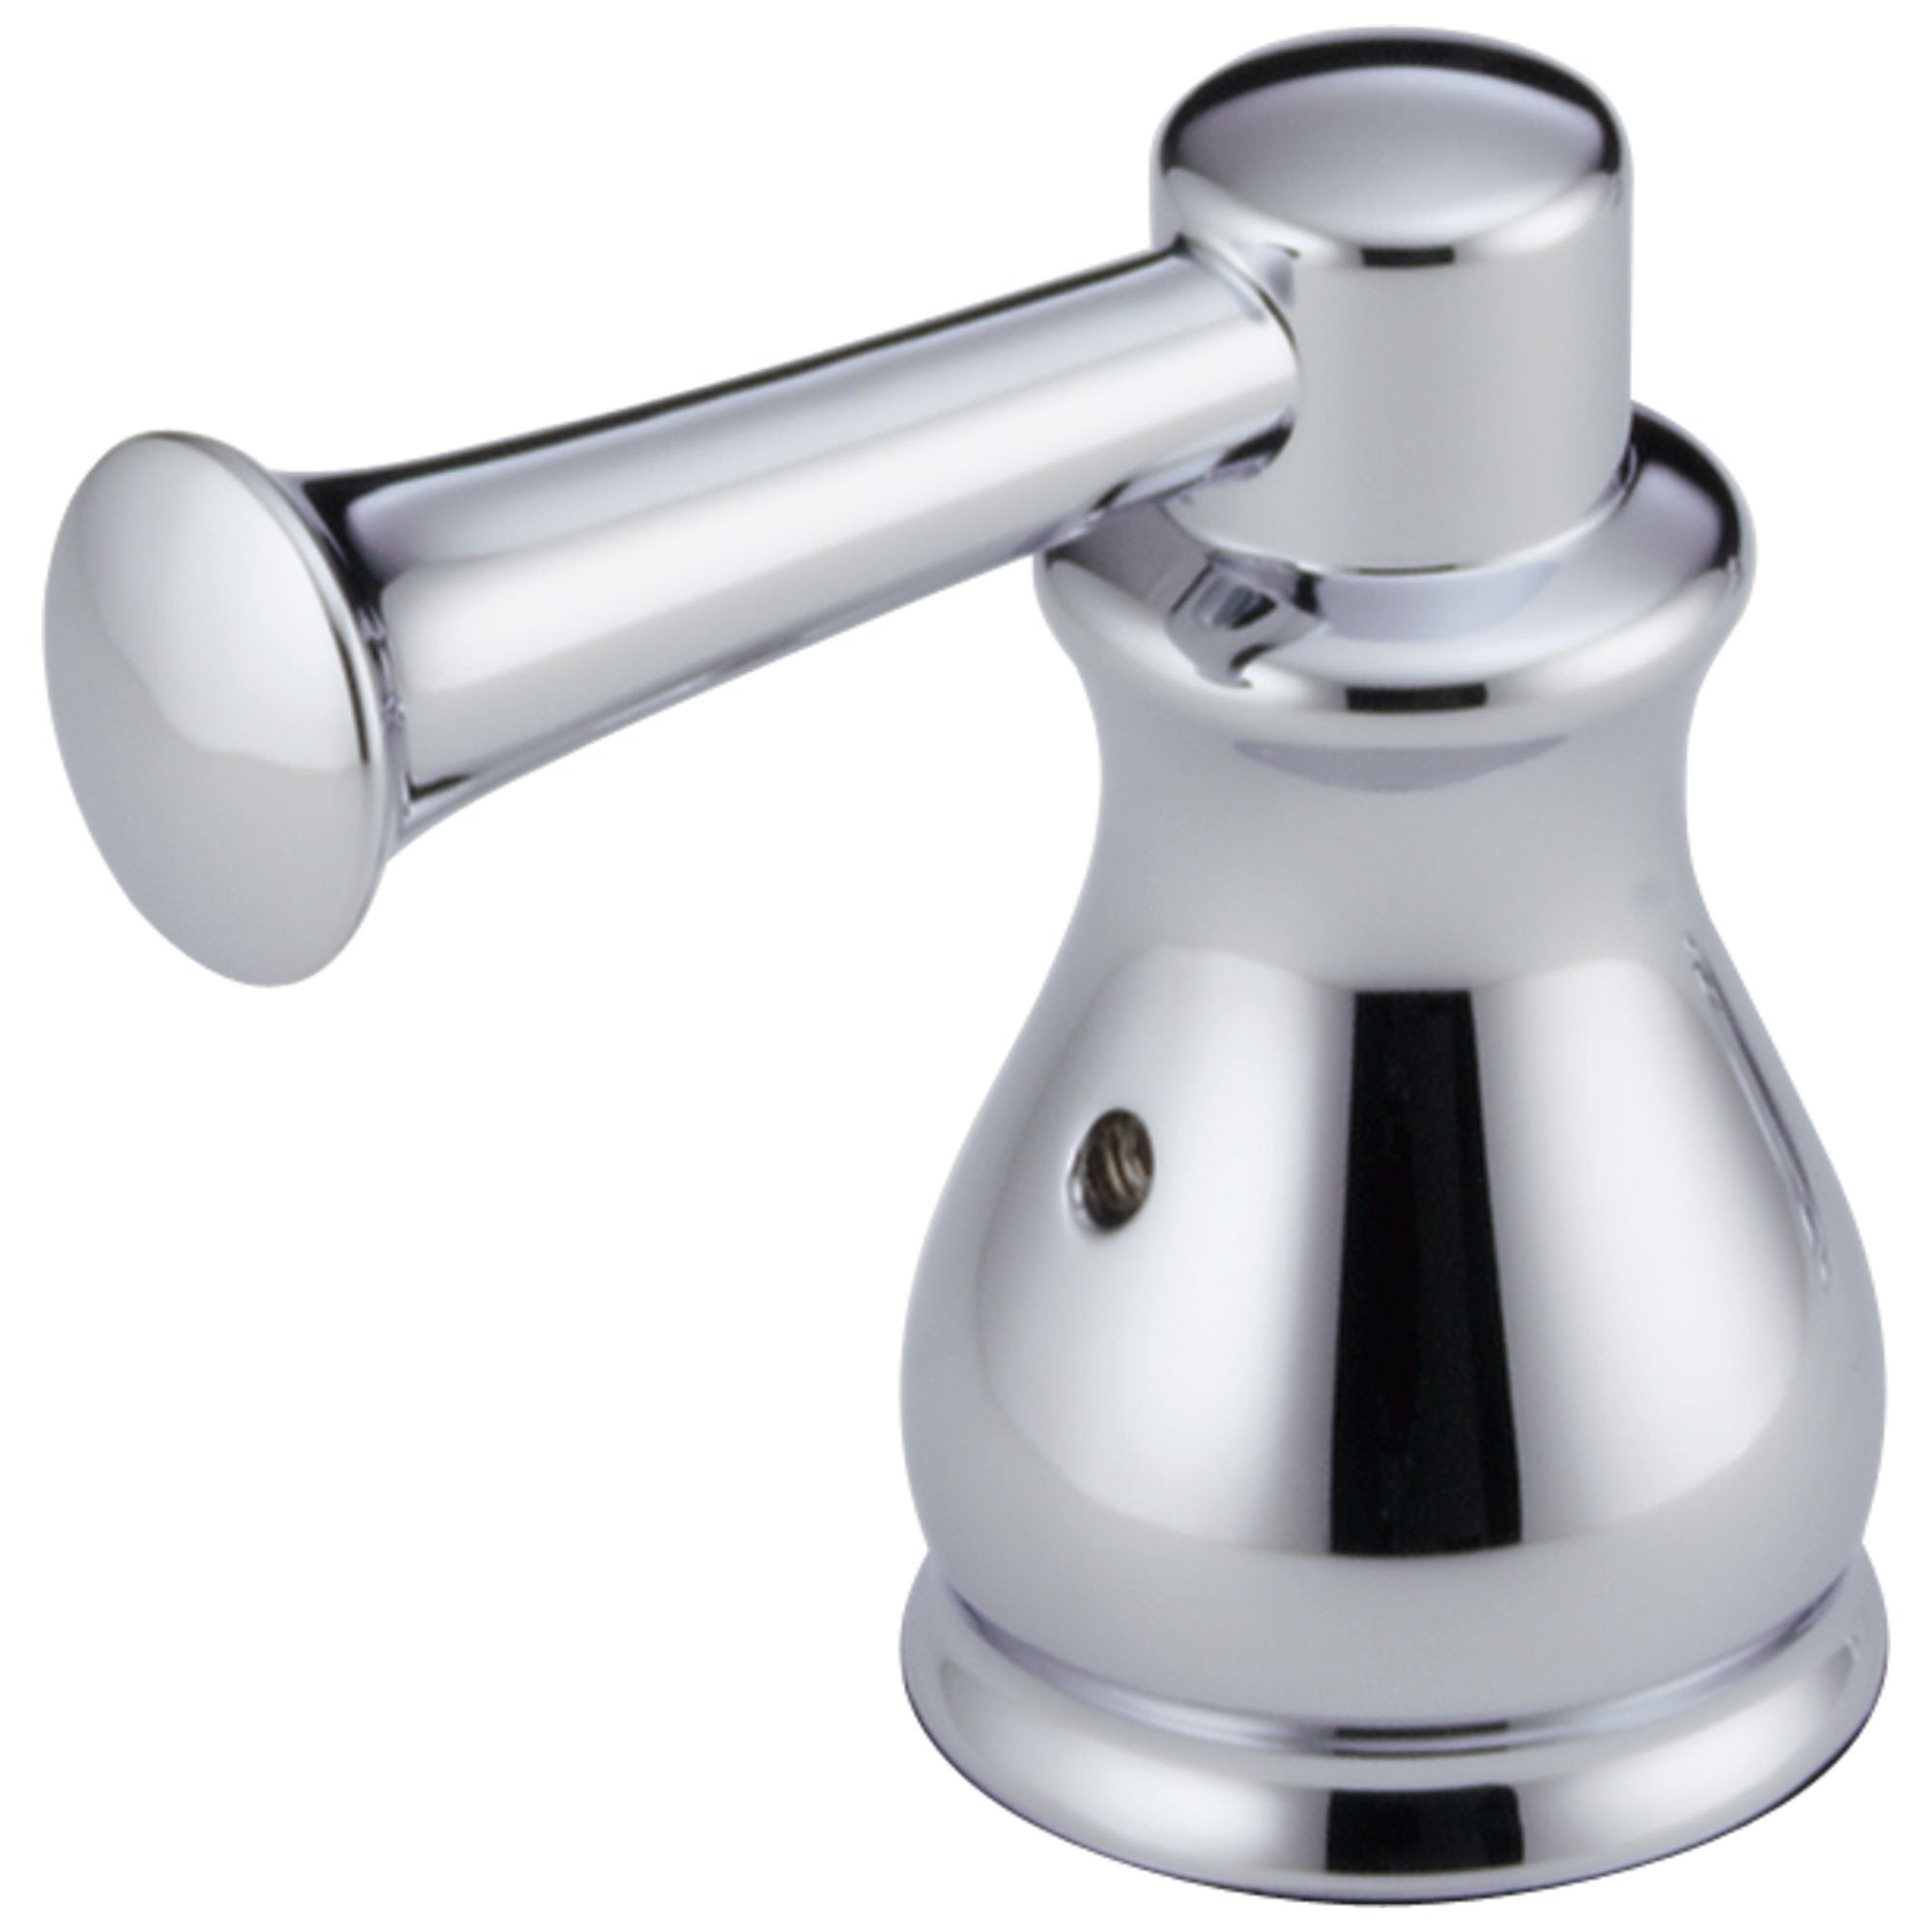 Delta Orleans Collection Chrome Finish Roman Tub Metal Lever Handles - Quantity 2 Included DH669